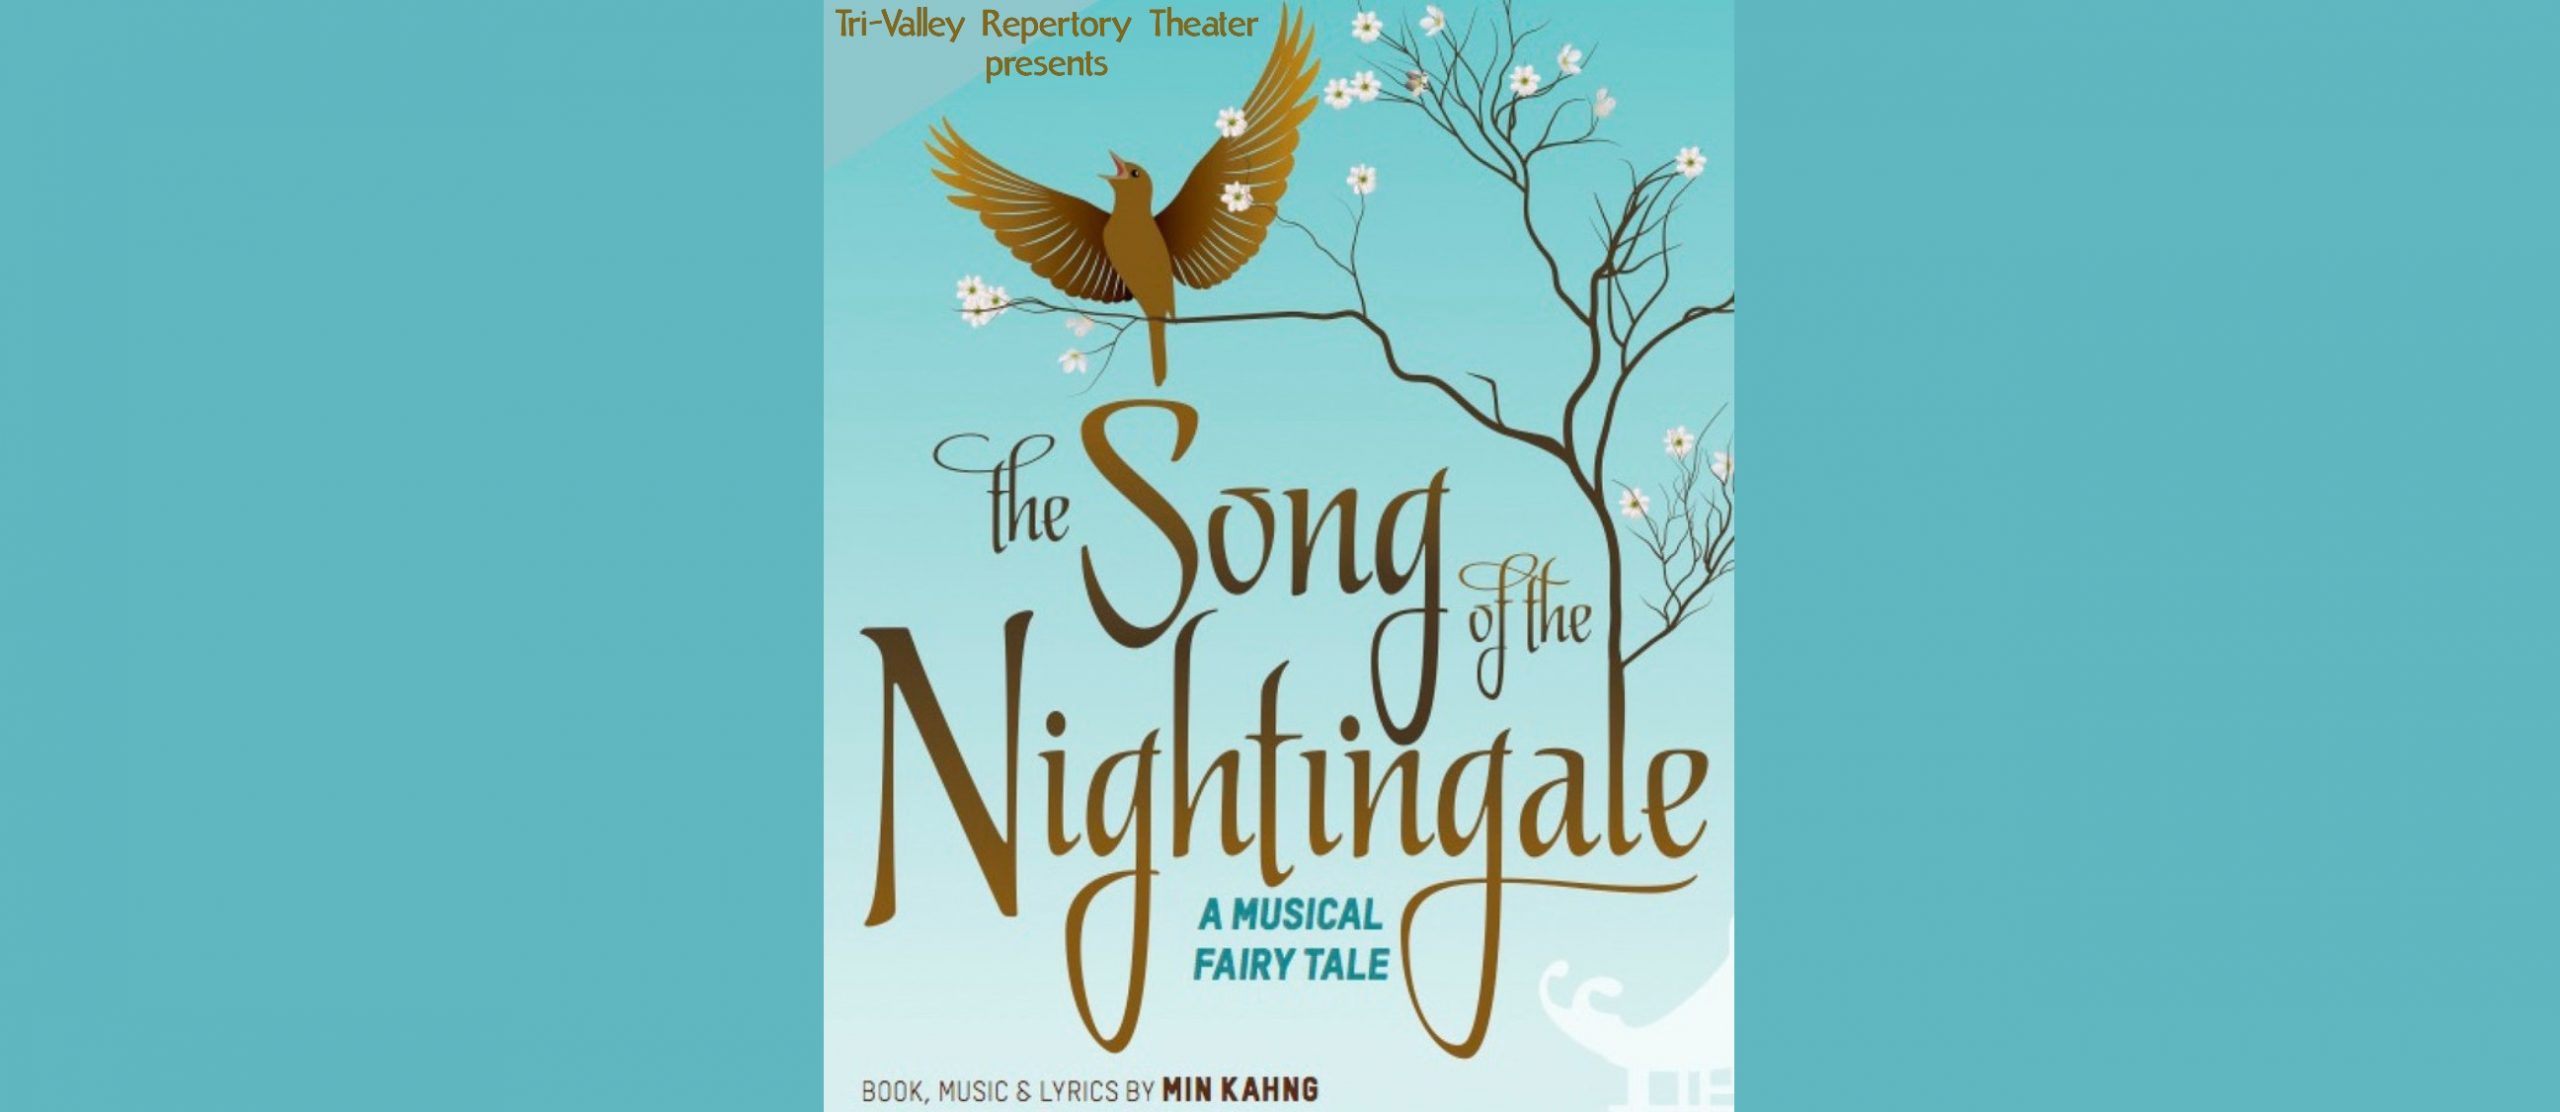 Song of the Nightingale | Tri-Valley Repertory Theatre